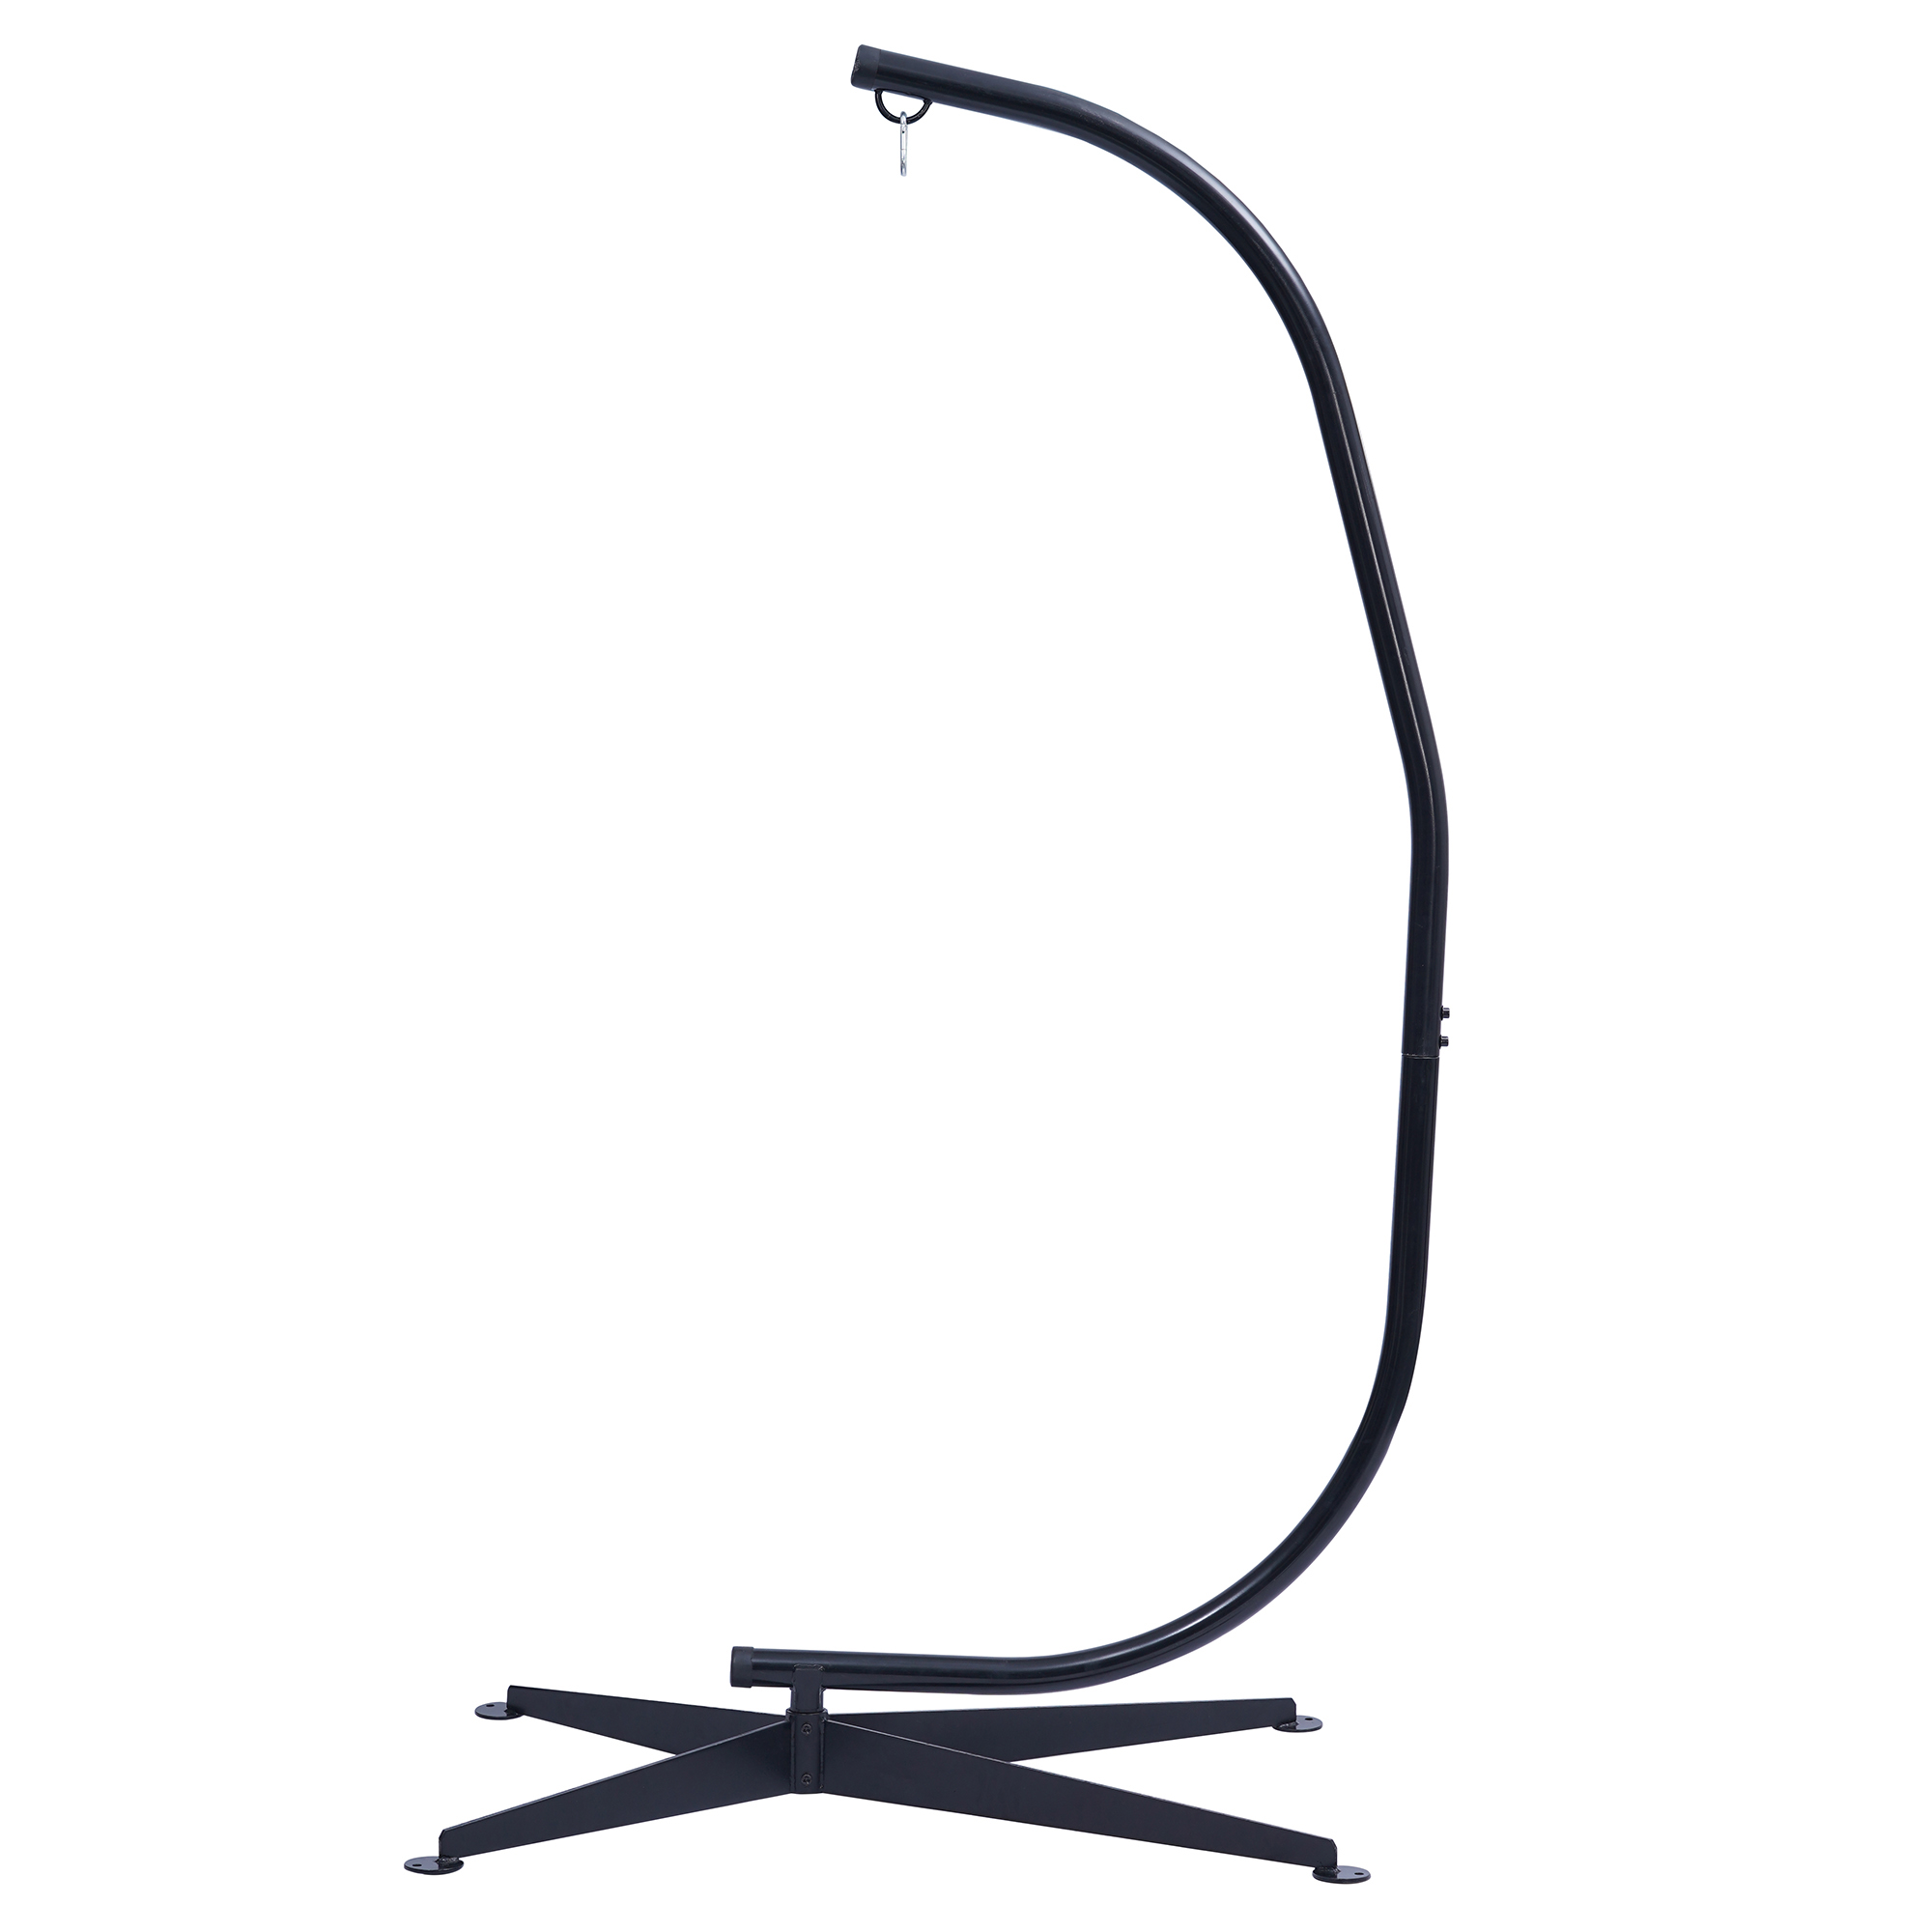 Hammock Chair Stand - Metal C-Stand